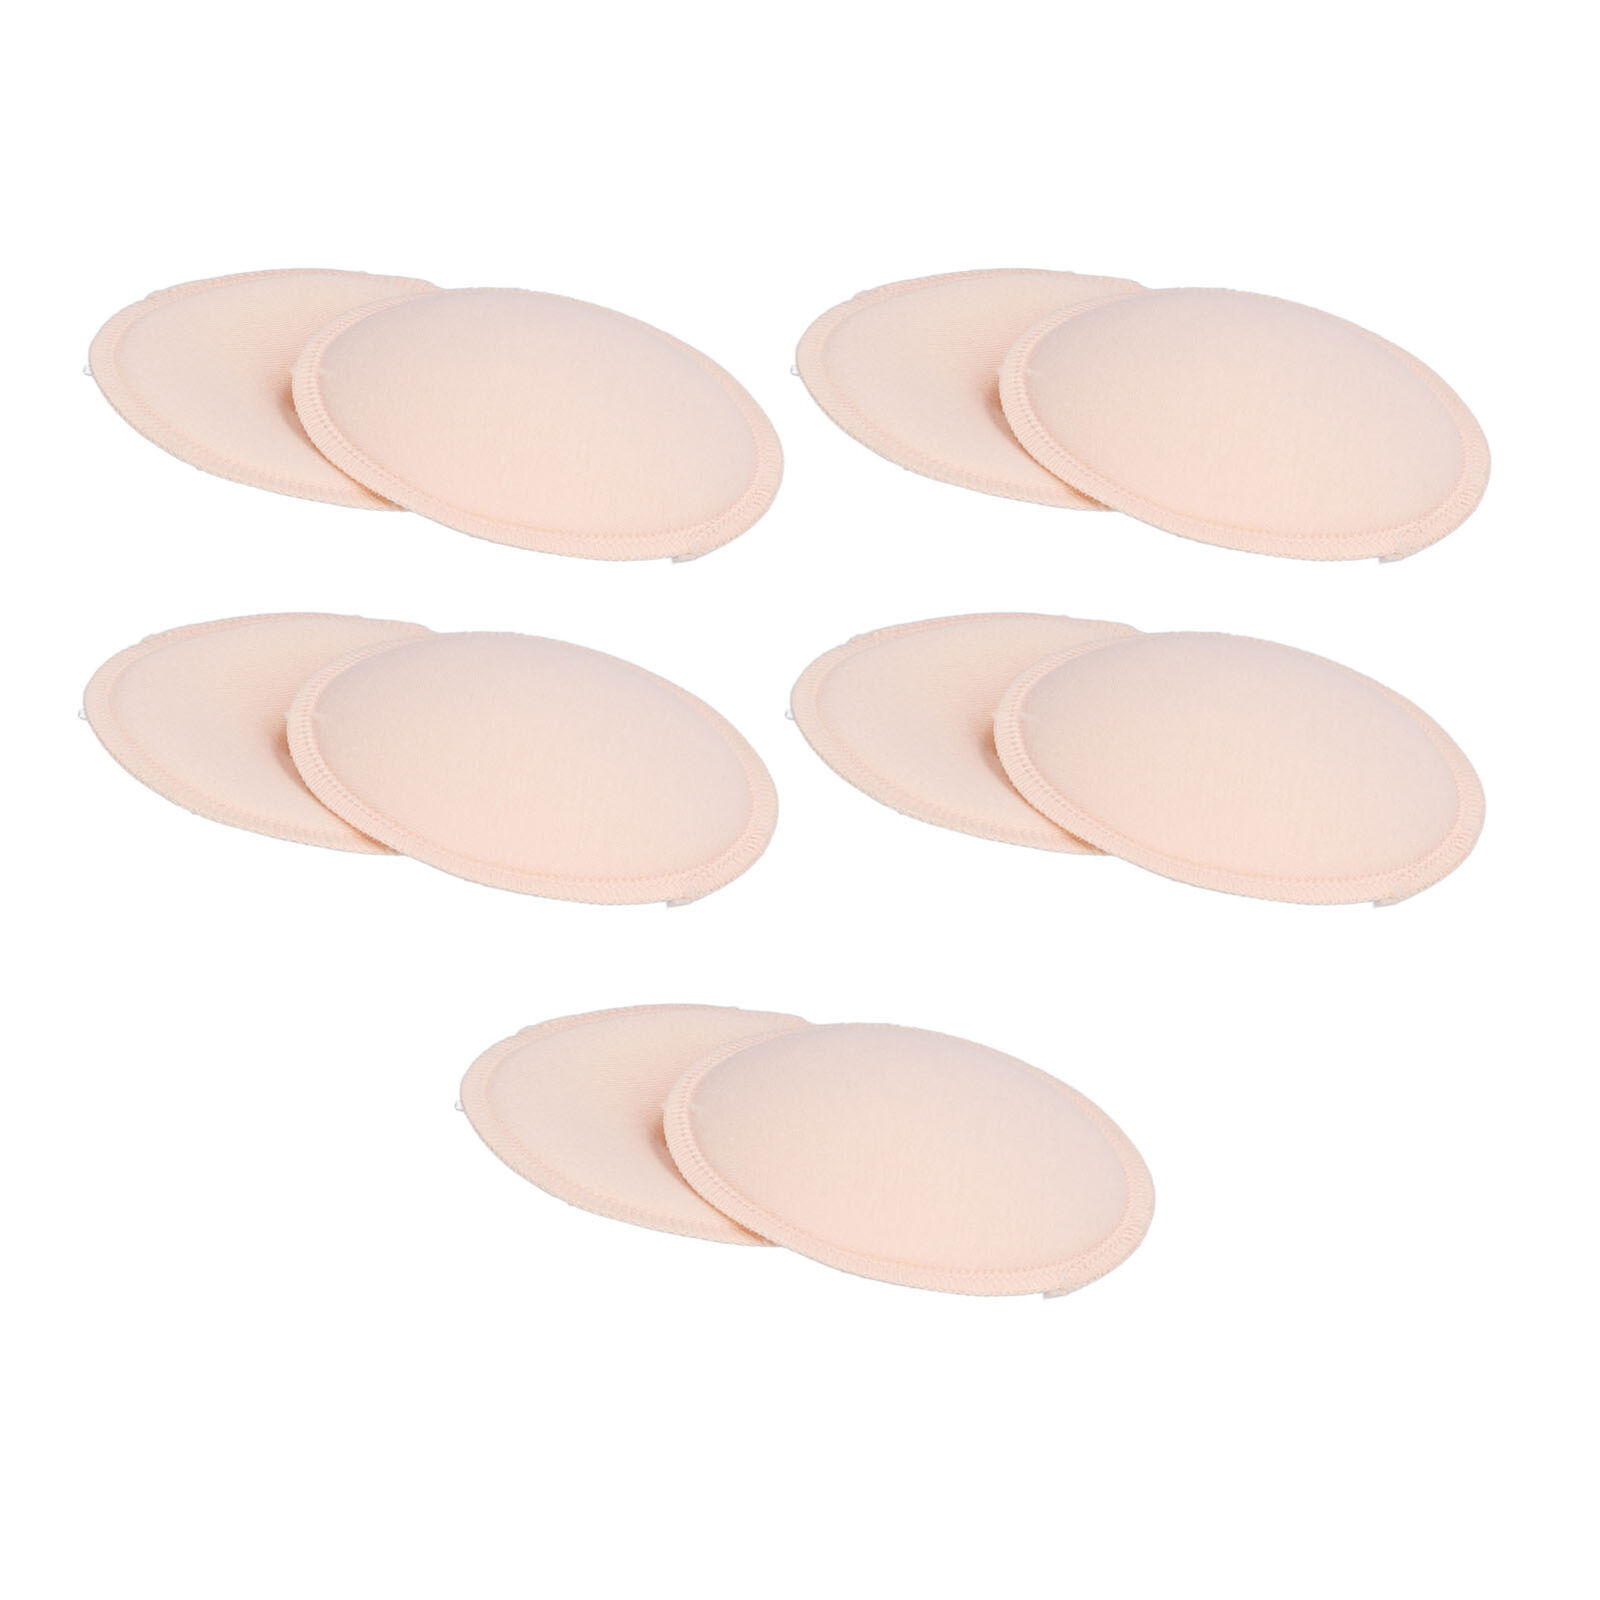 10Pcs Washable Breast Cotton Pads Reusable Nursing Pads For Breastfeeding Pads